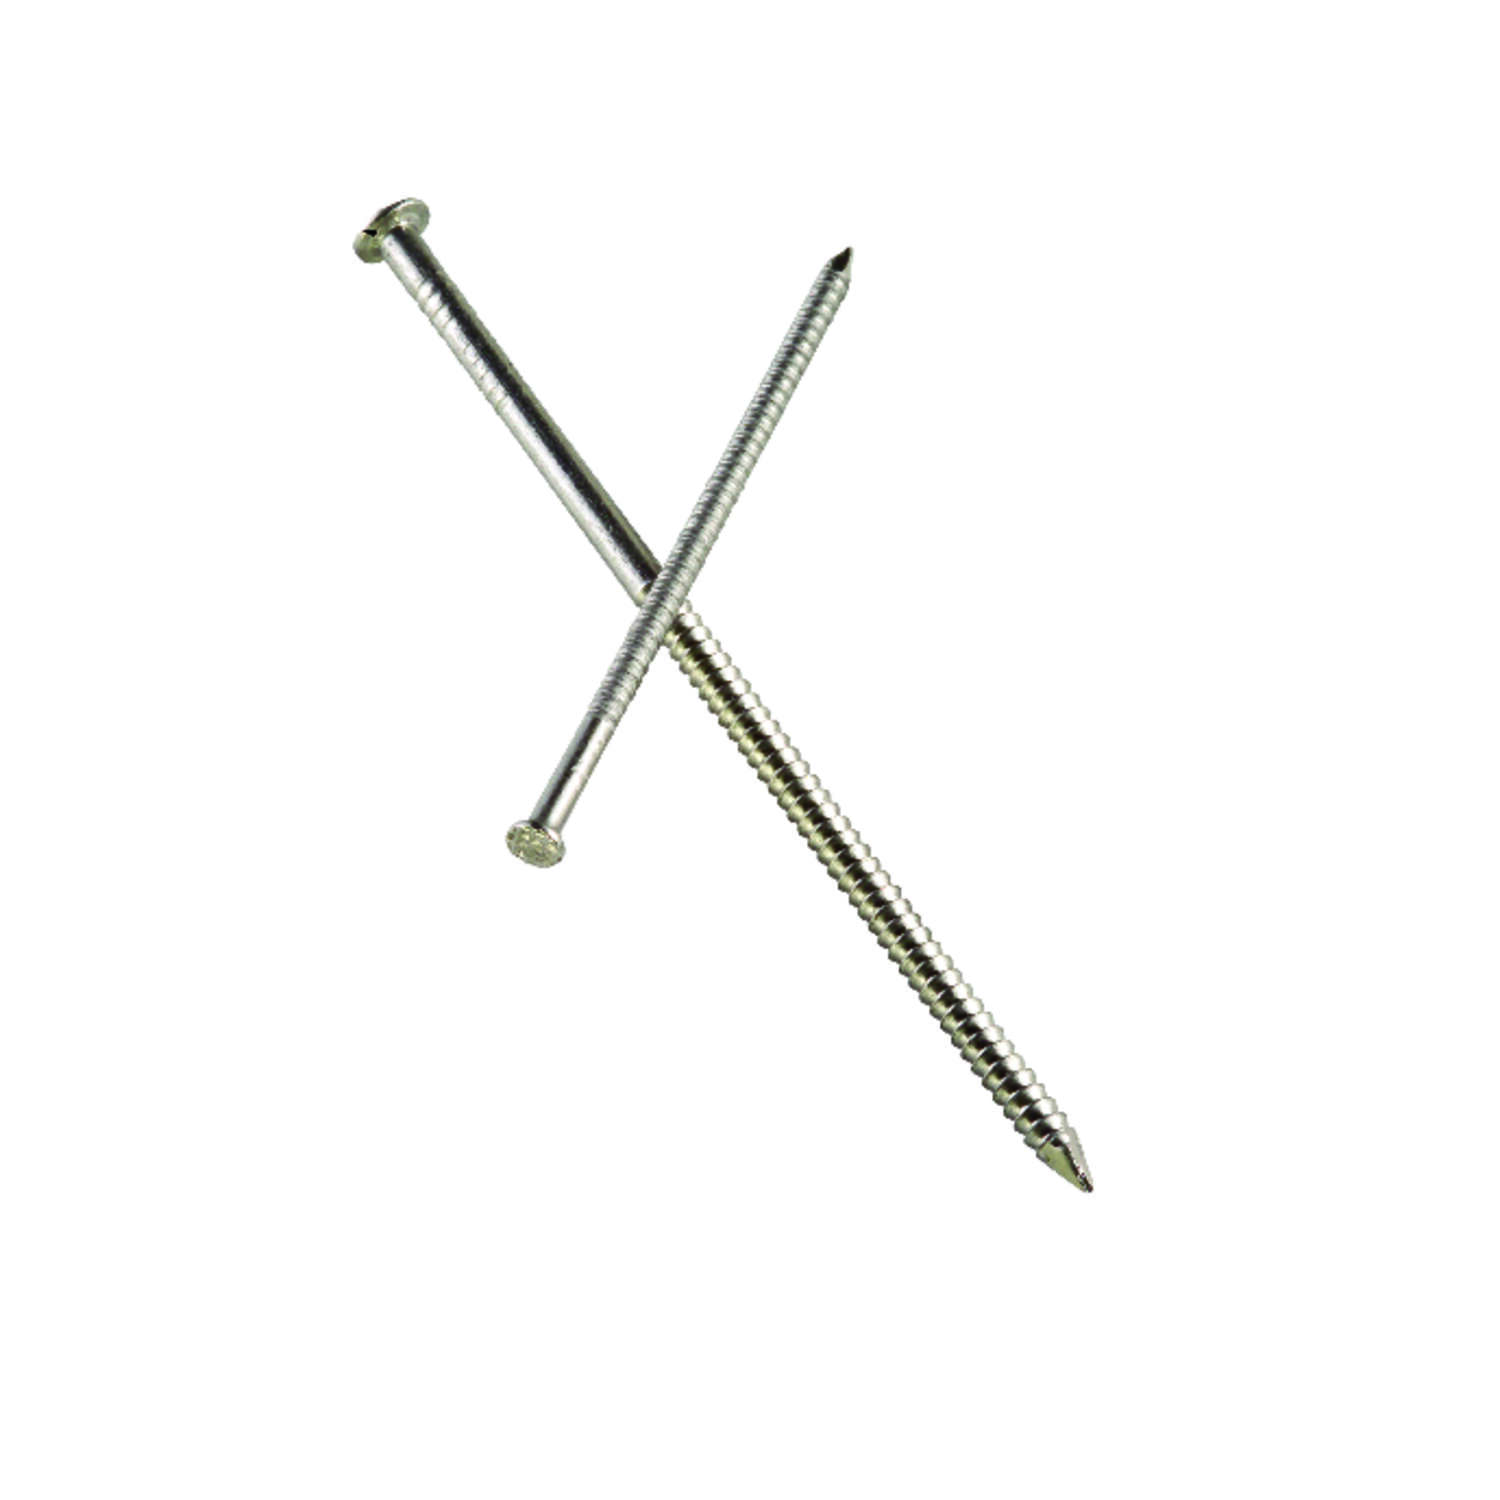 Simpson StrongTie 8D 21/2 in. Siding Stainless Steel Nail Round 1 lb. Ace Hardware